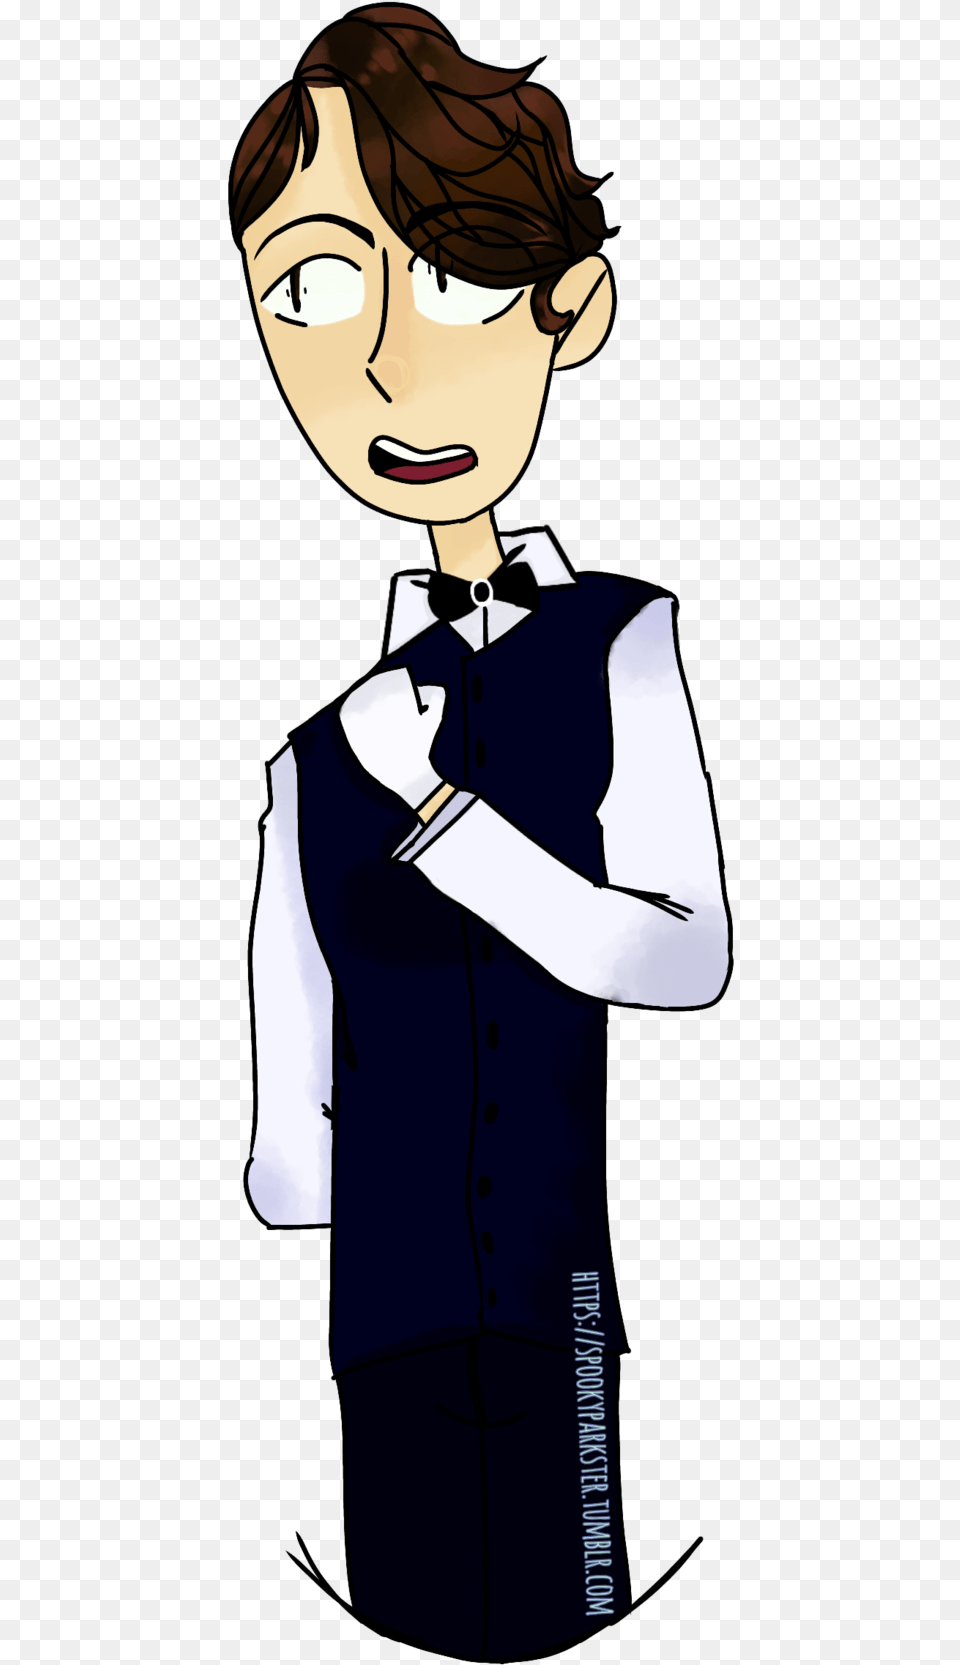 My Contribution To The Markiplier Birthday Ego Collab Cartoon, Accessories, Vest, Tie, Shirt Png